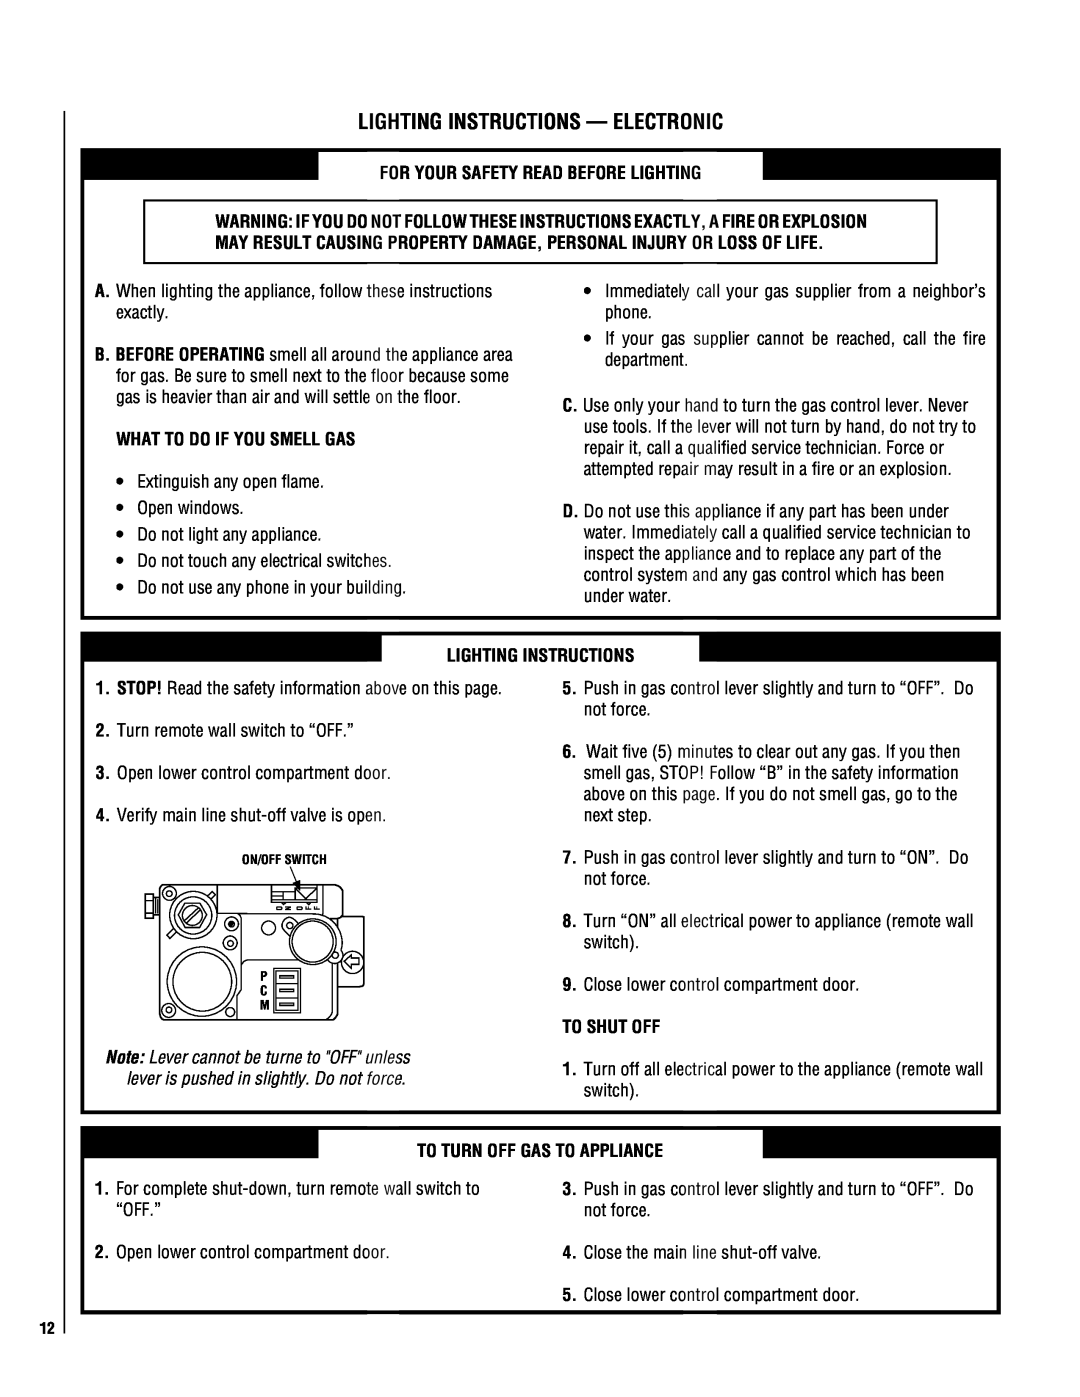 TOA Electronics P0055-DRG manual For Your Safety Read Before Lighting, What To Do If You Smell Gas, Lighting Instructions 